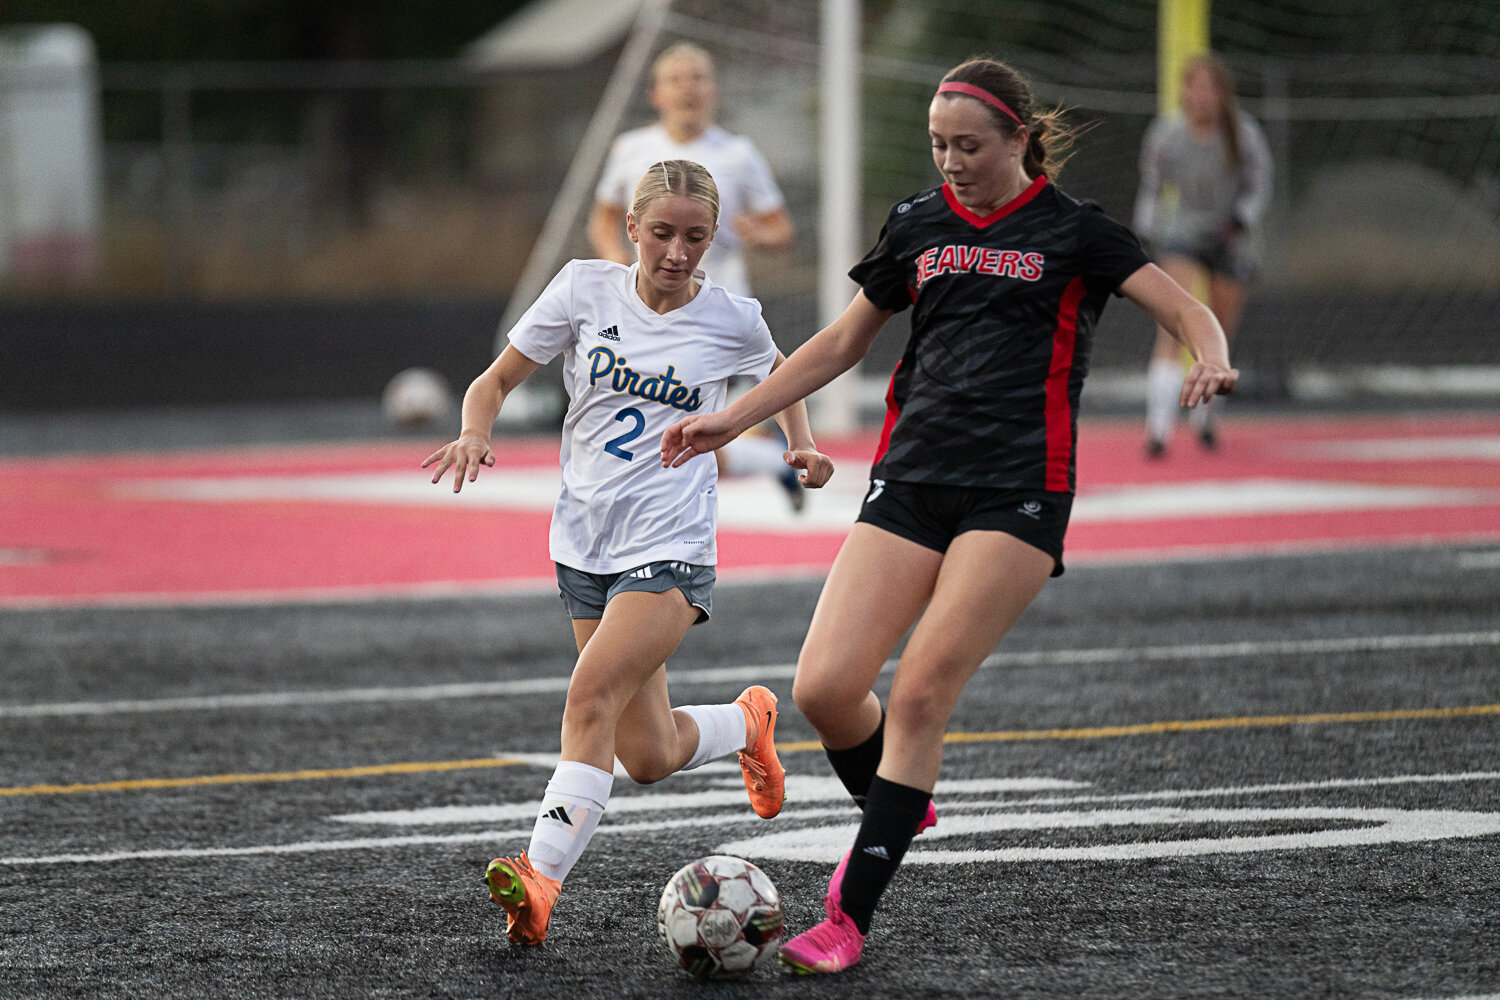 Adna's Sophie Hagseth and Tenino's Abagail Archibald both go for the ball during the first half of a 0-0 draw on Sept. 14.